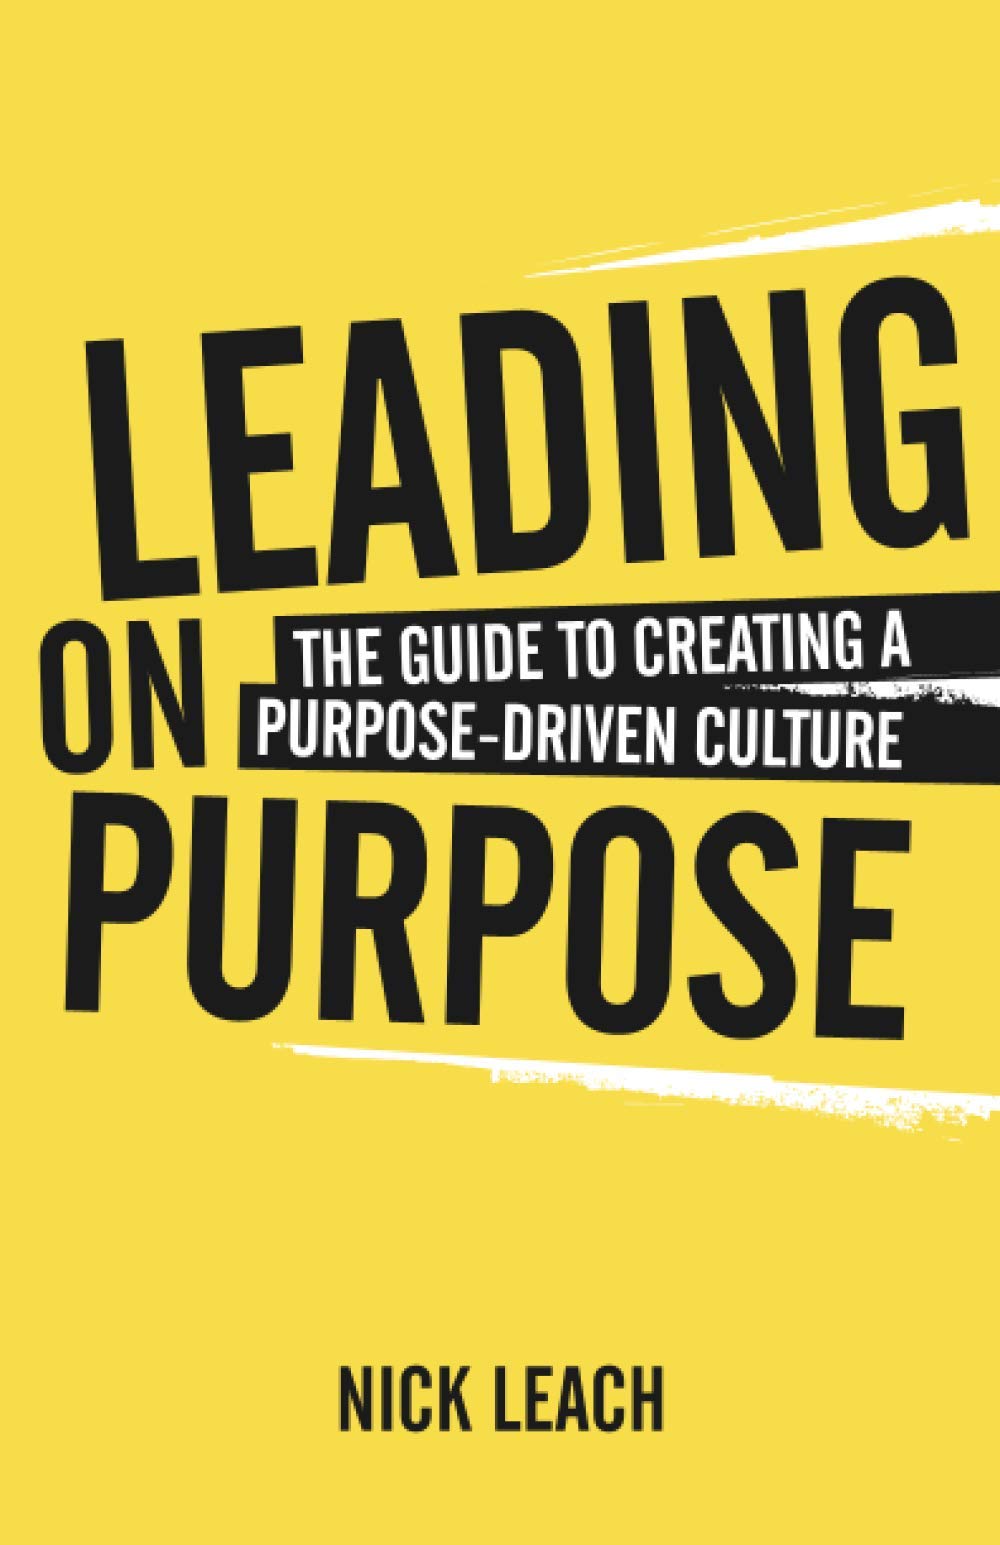 Leading On Purpose: The guide to creating a purpose driven culture